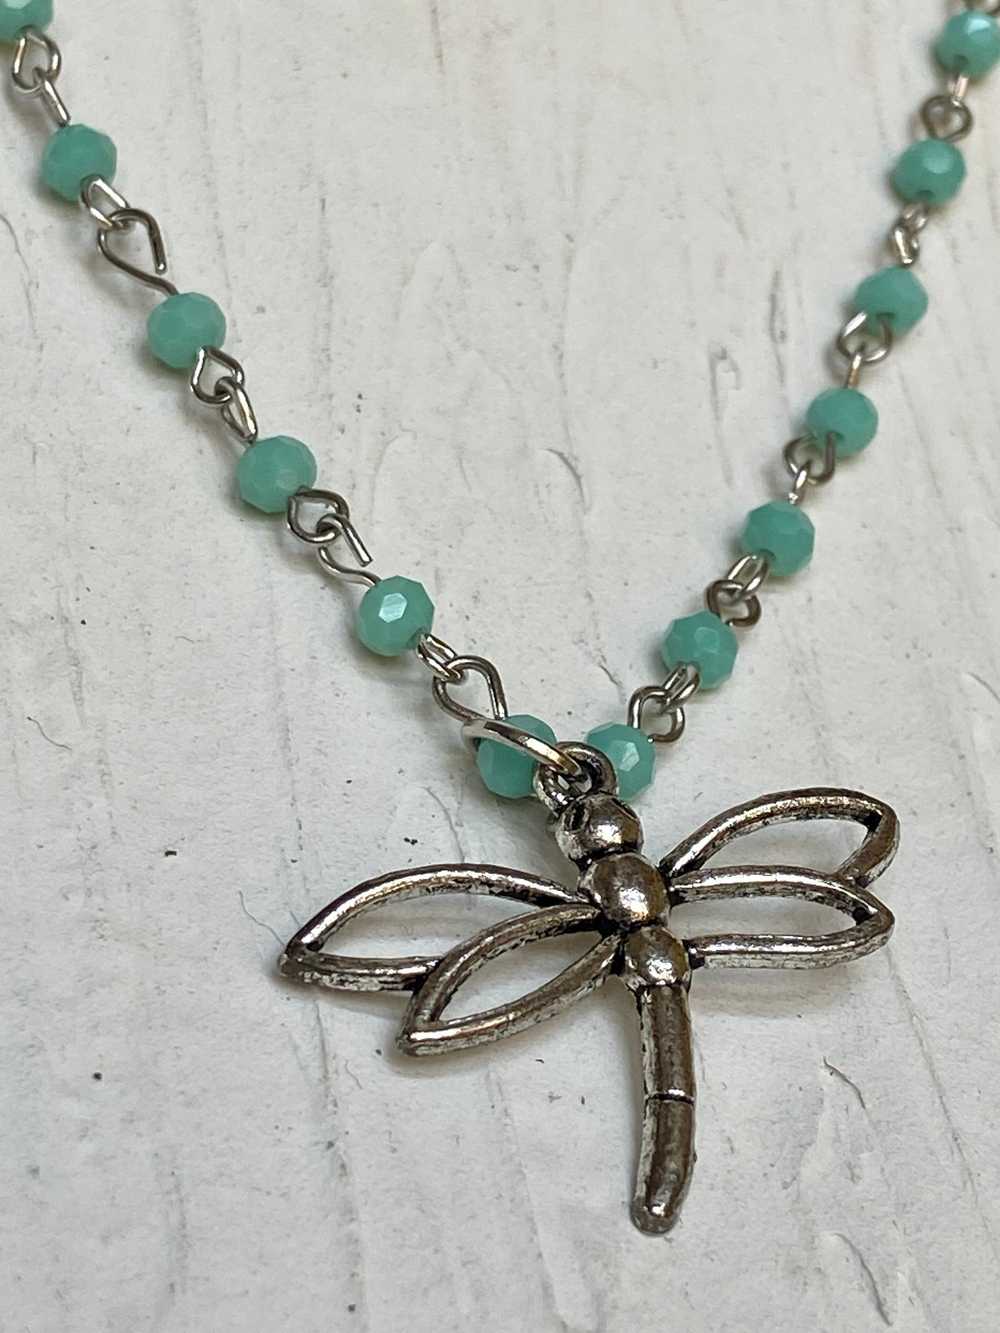 Dragonfly necklace - image 3